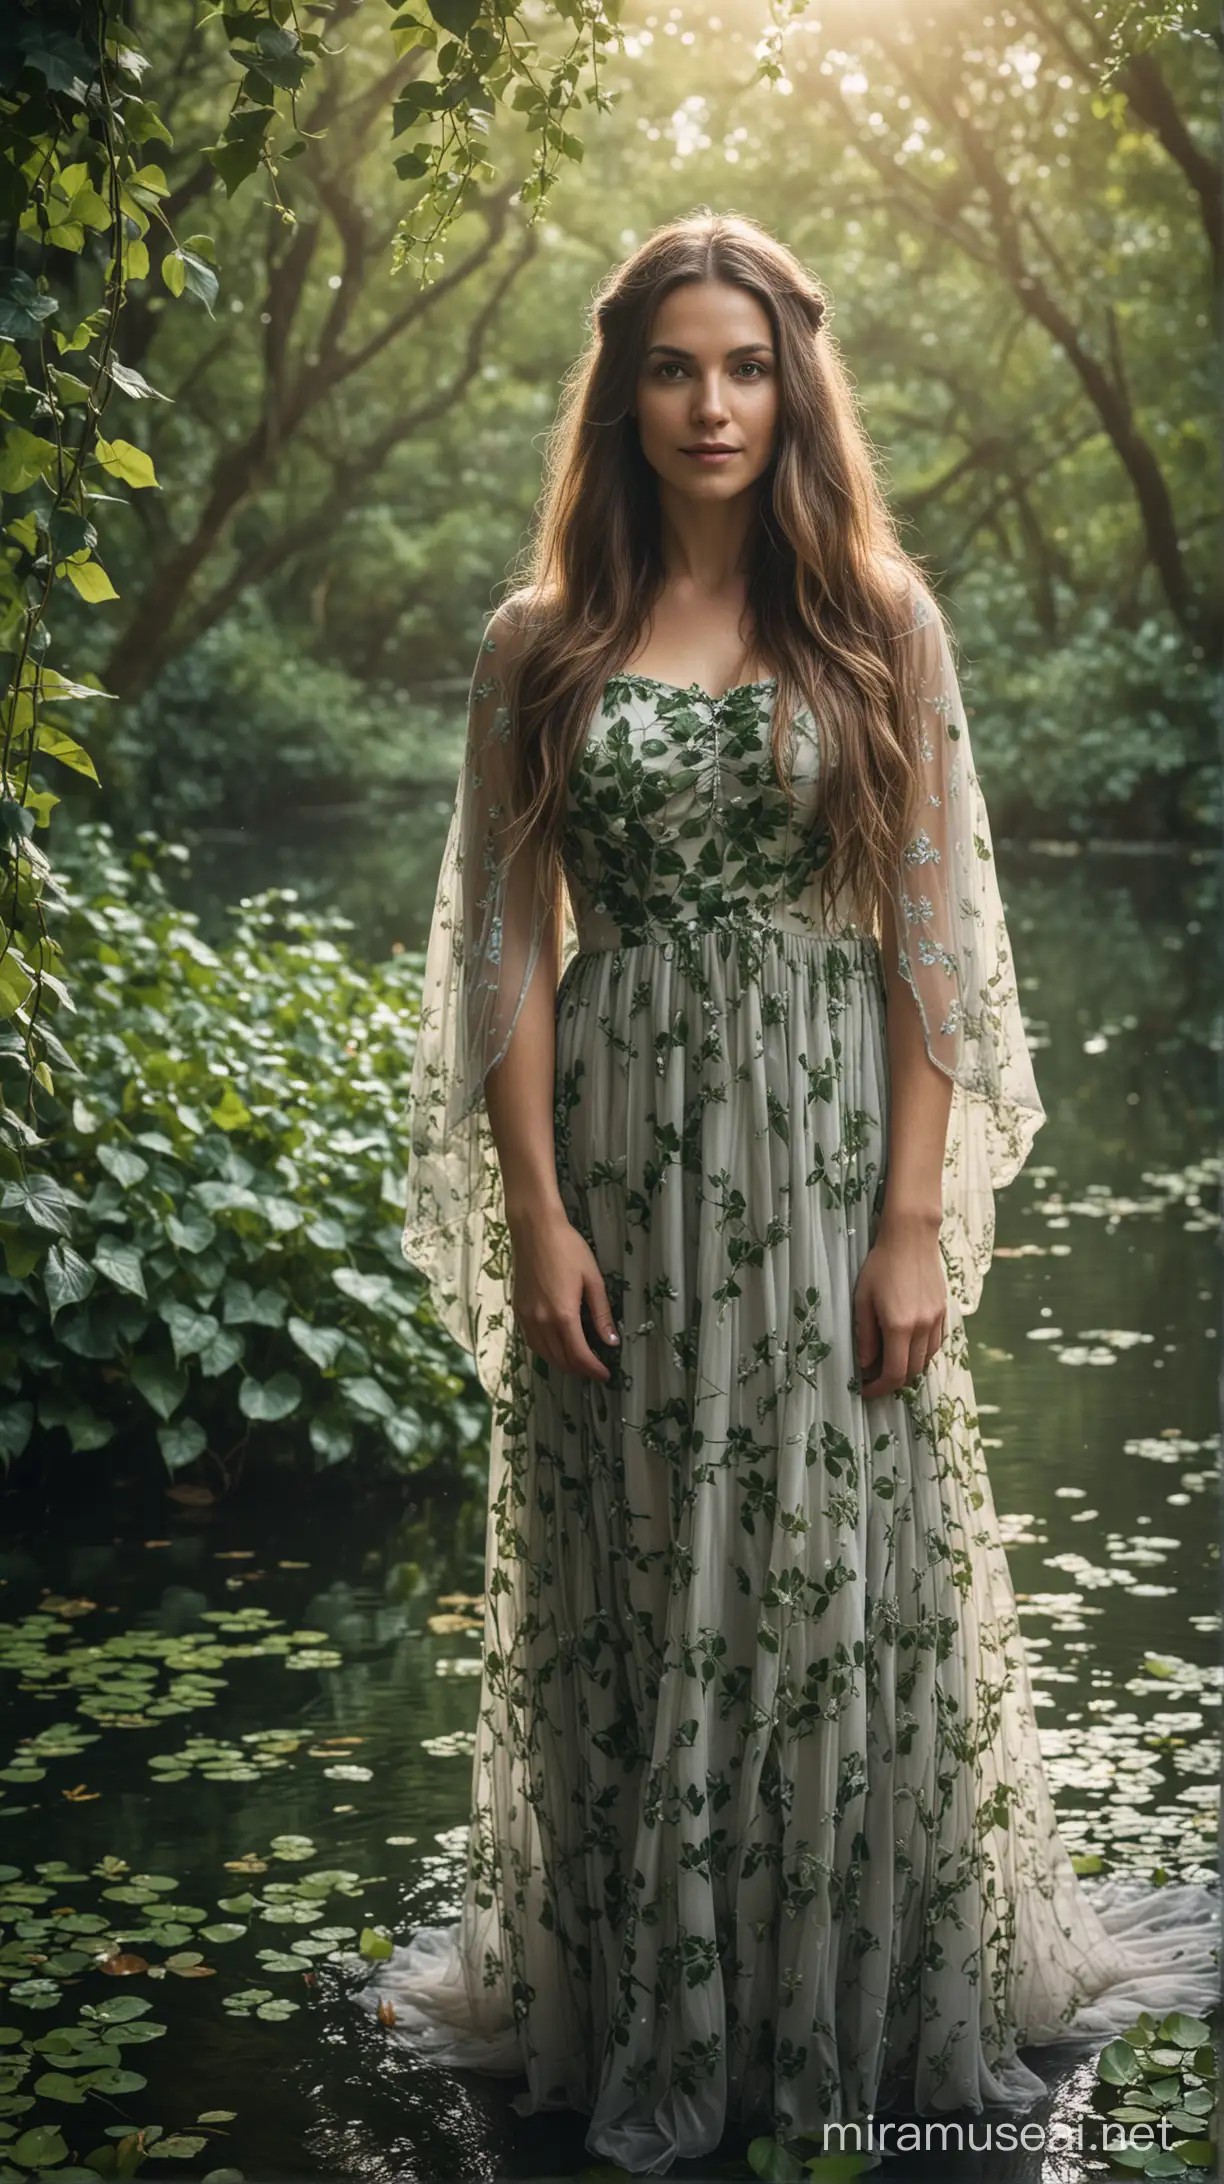 Serene IvyClad Woman in a Mythical Forest Pond Setting